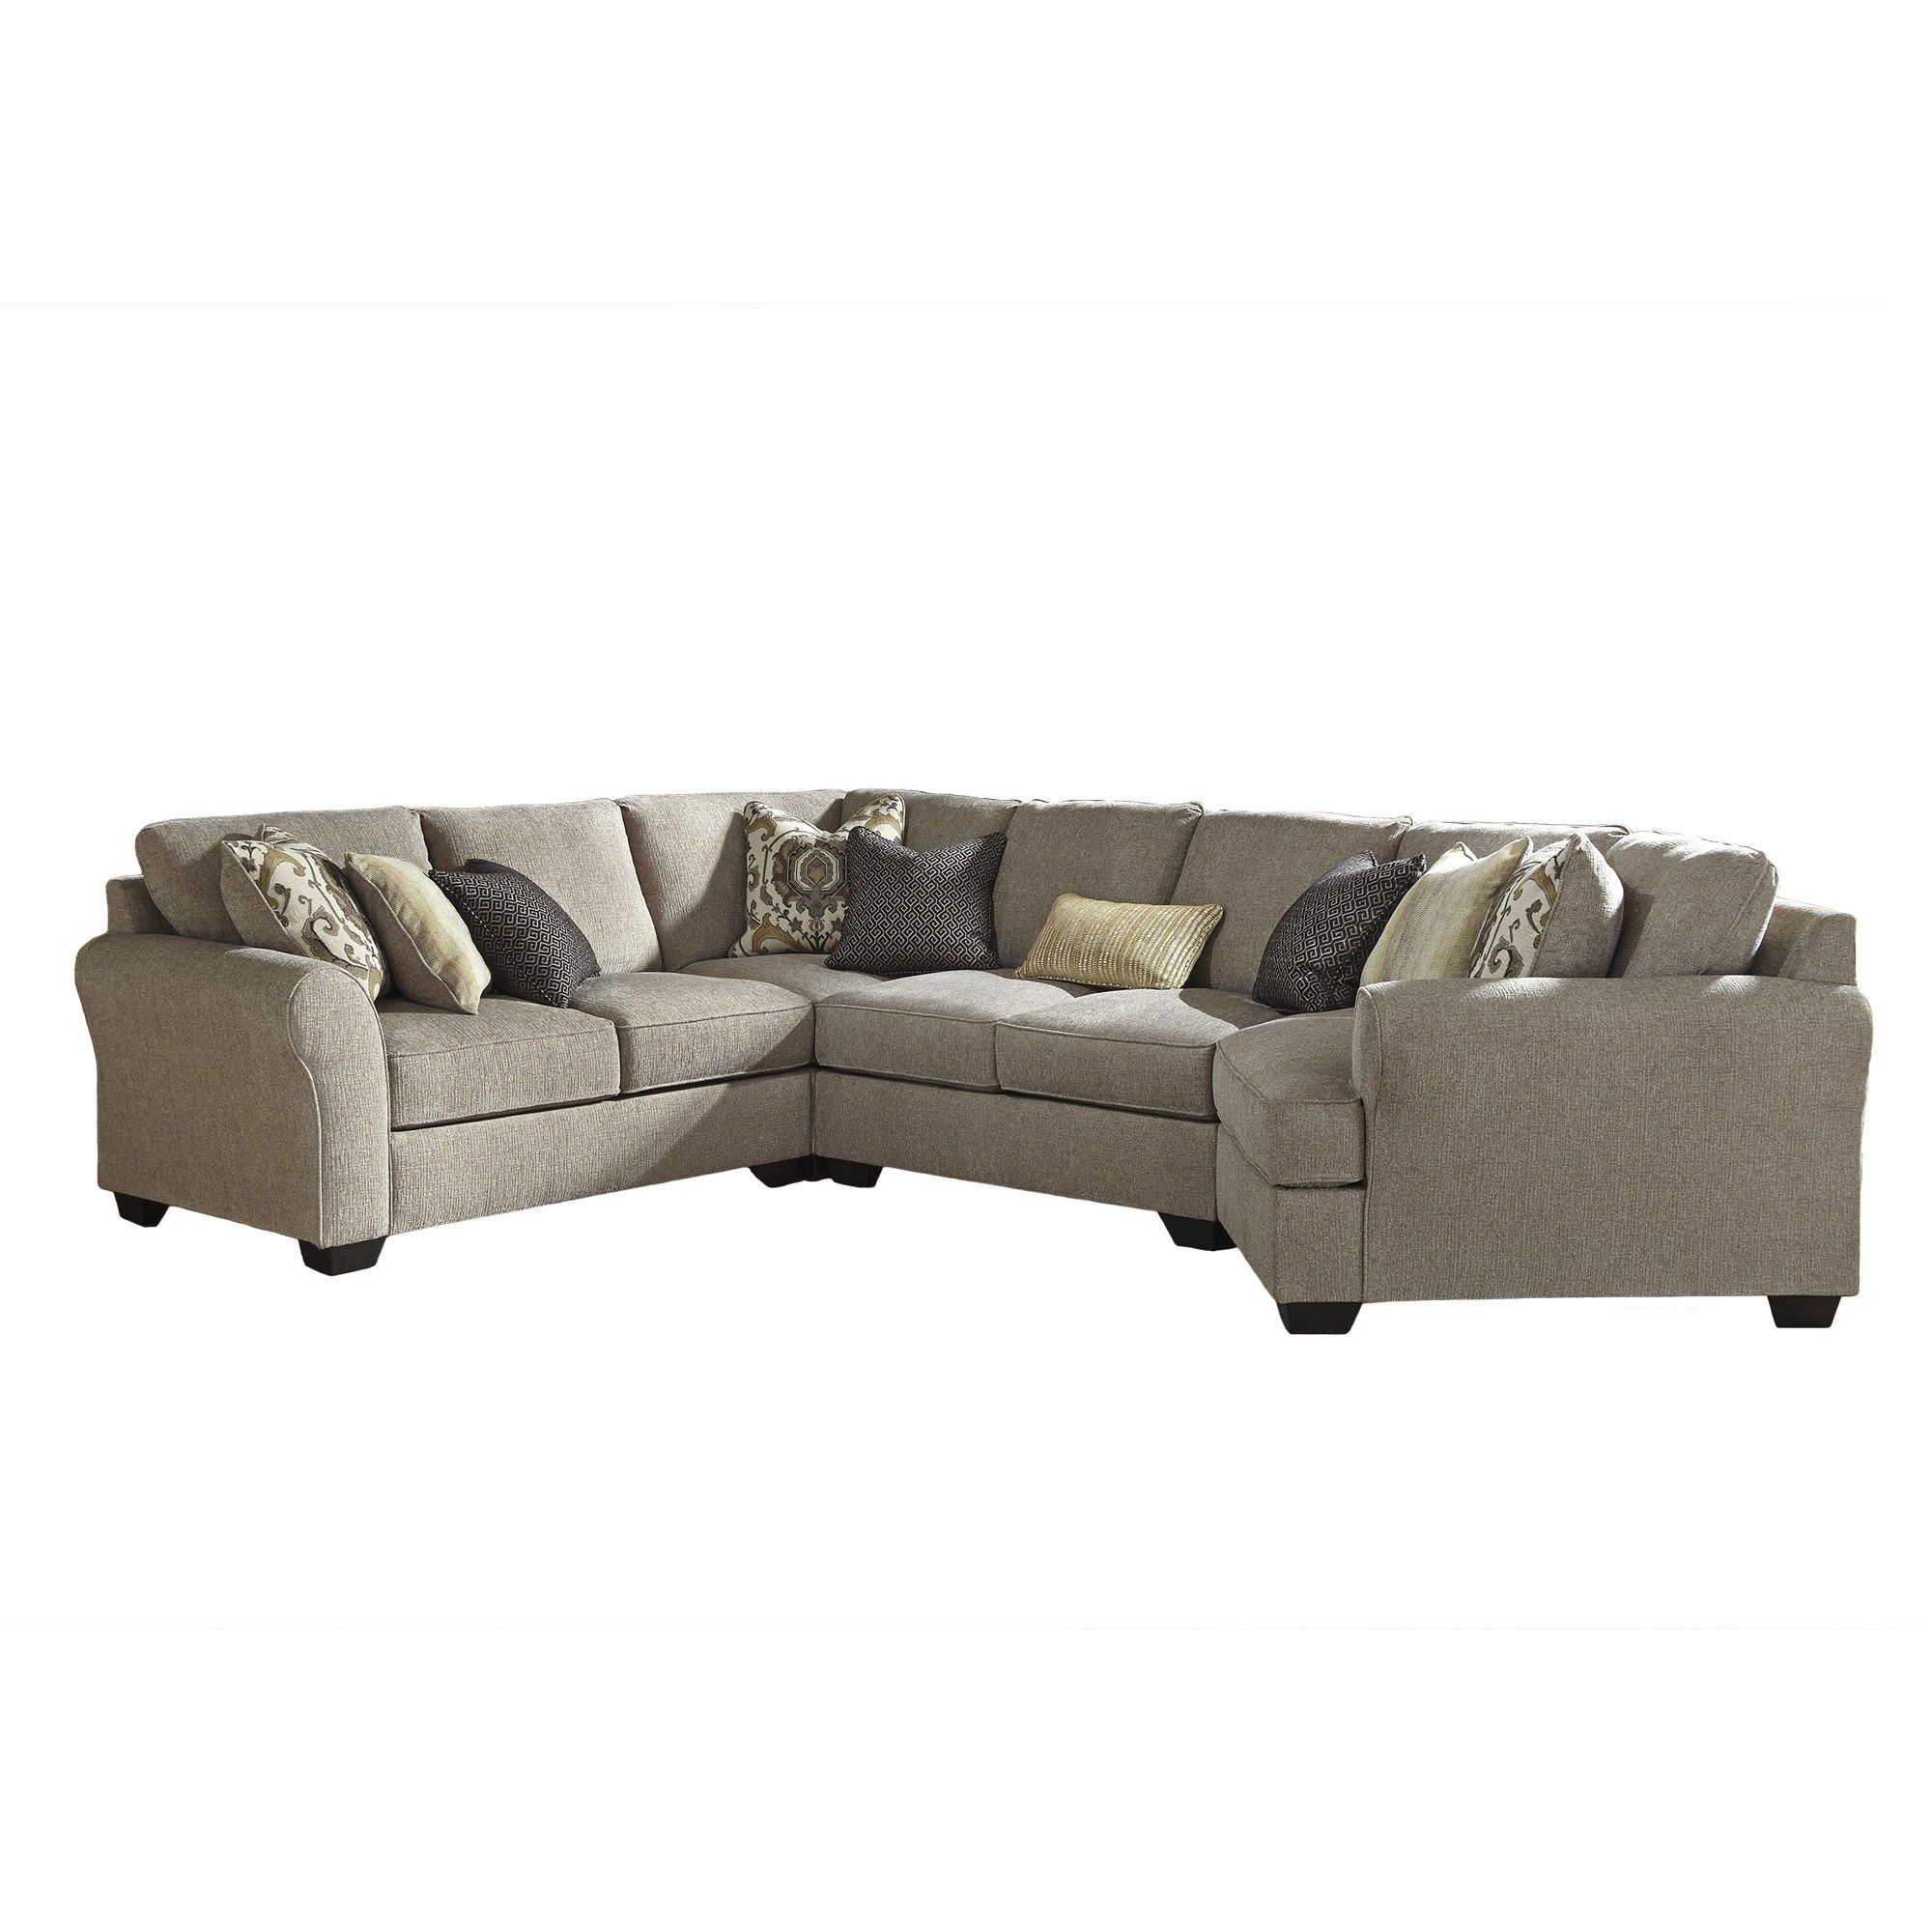 Pantomine Right Hand Facing 4 Piece Sectional | Tepperman's Regarding Teppermans Sectional Sofas (Photo 10 of 10)